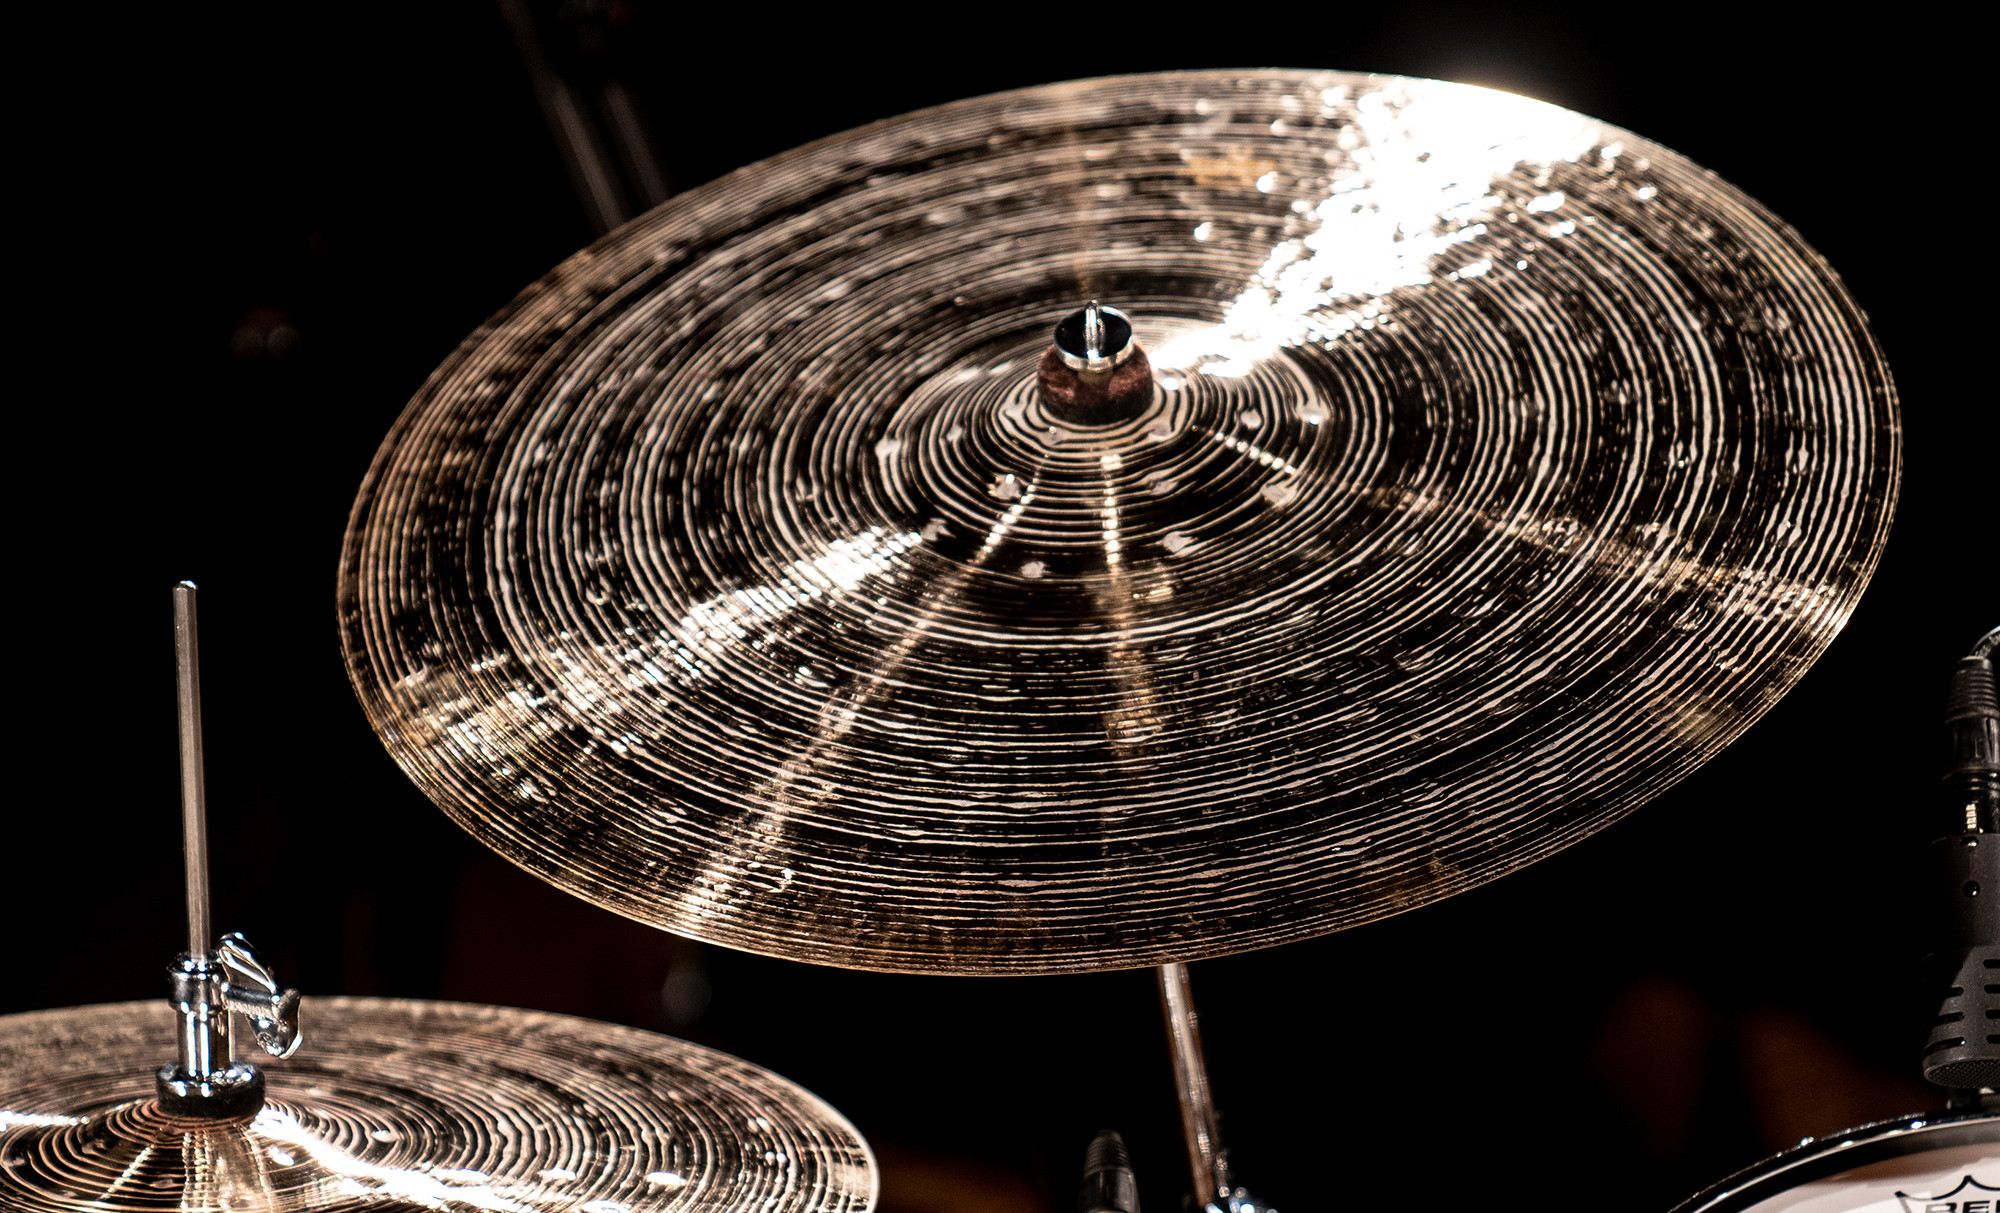 MEINL Cymbals マイネル Byzance Foundry Reserve Series クラッシュ